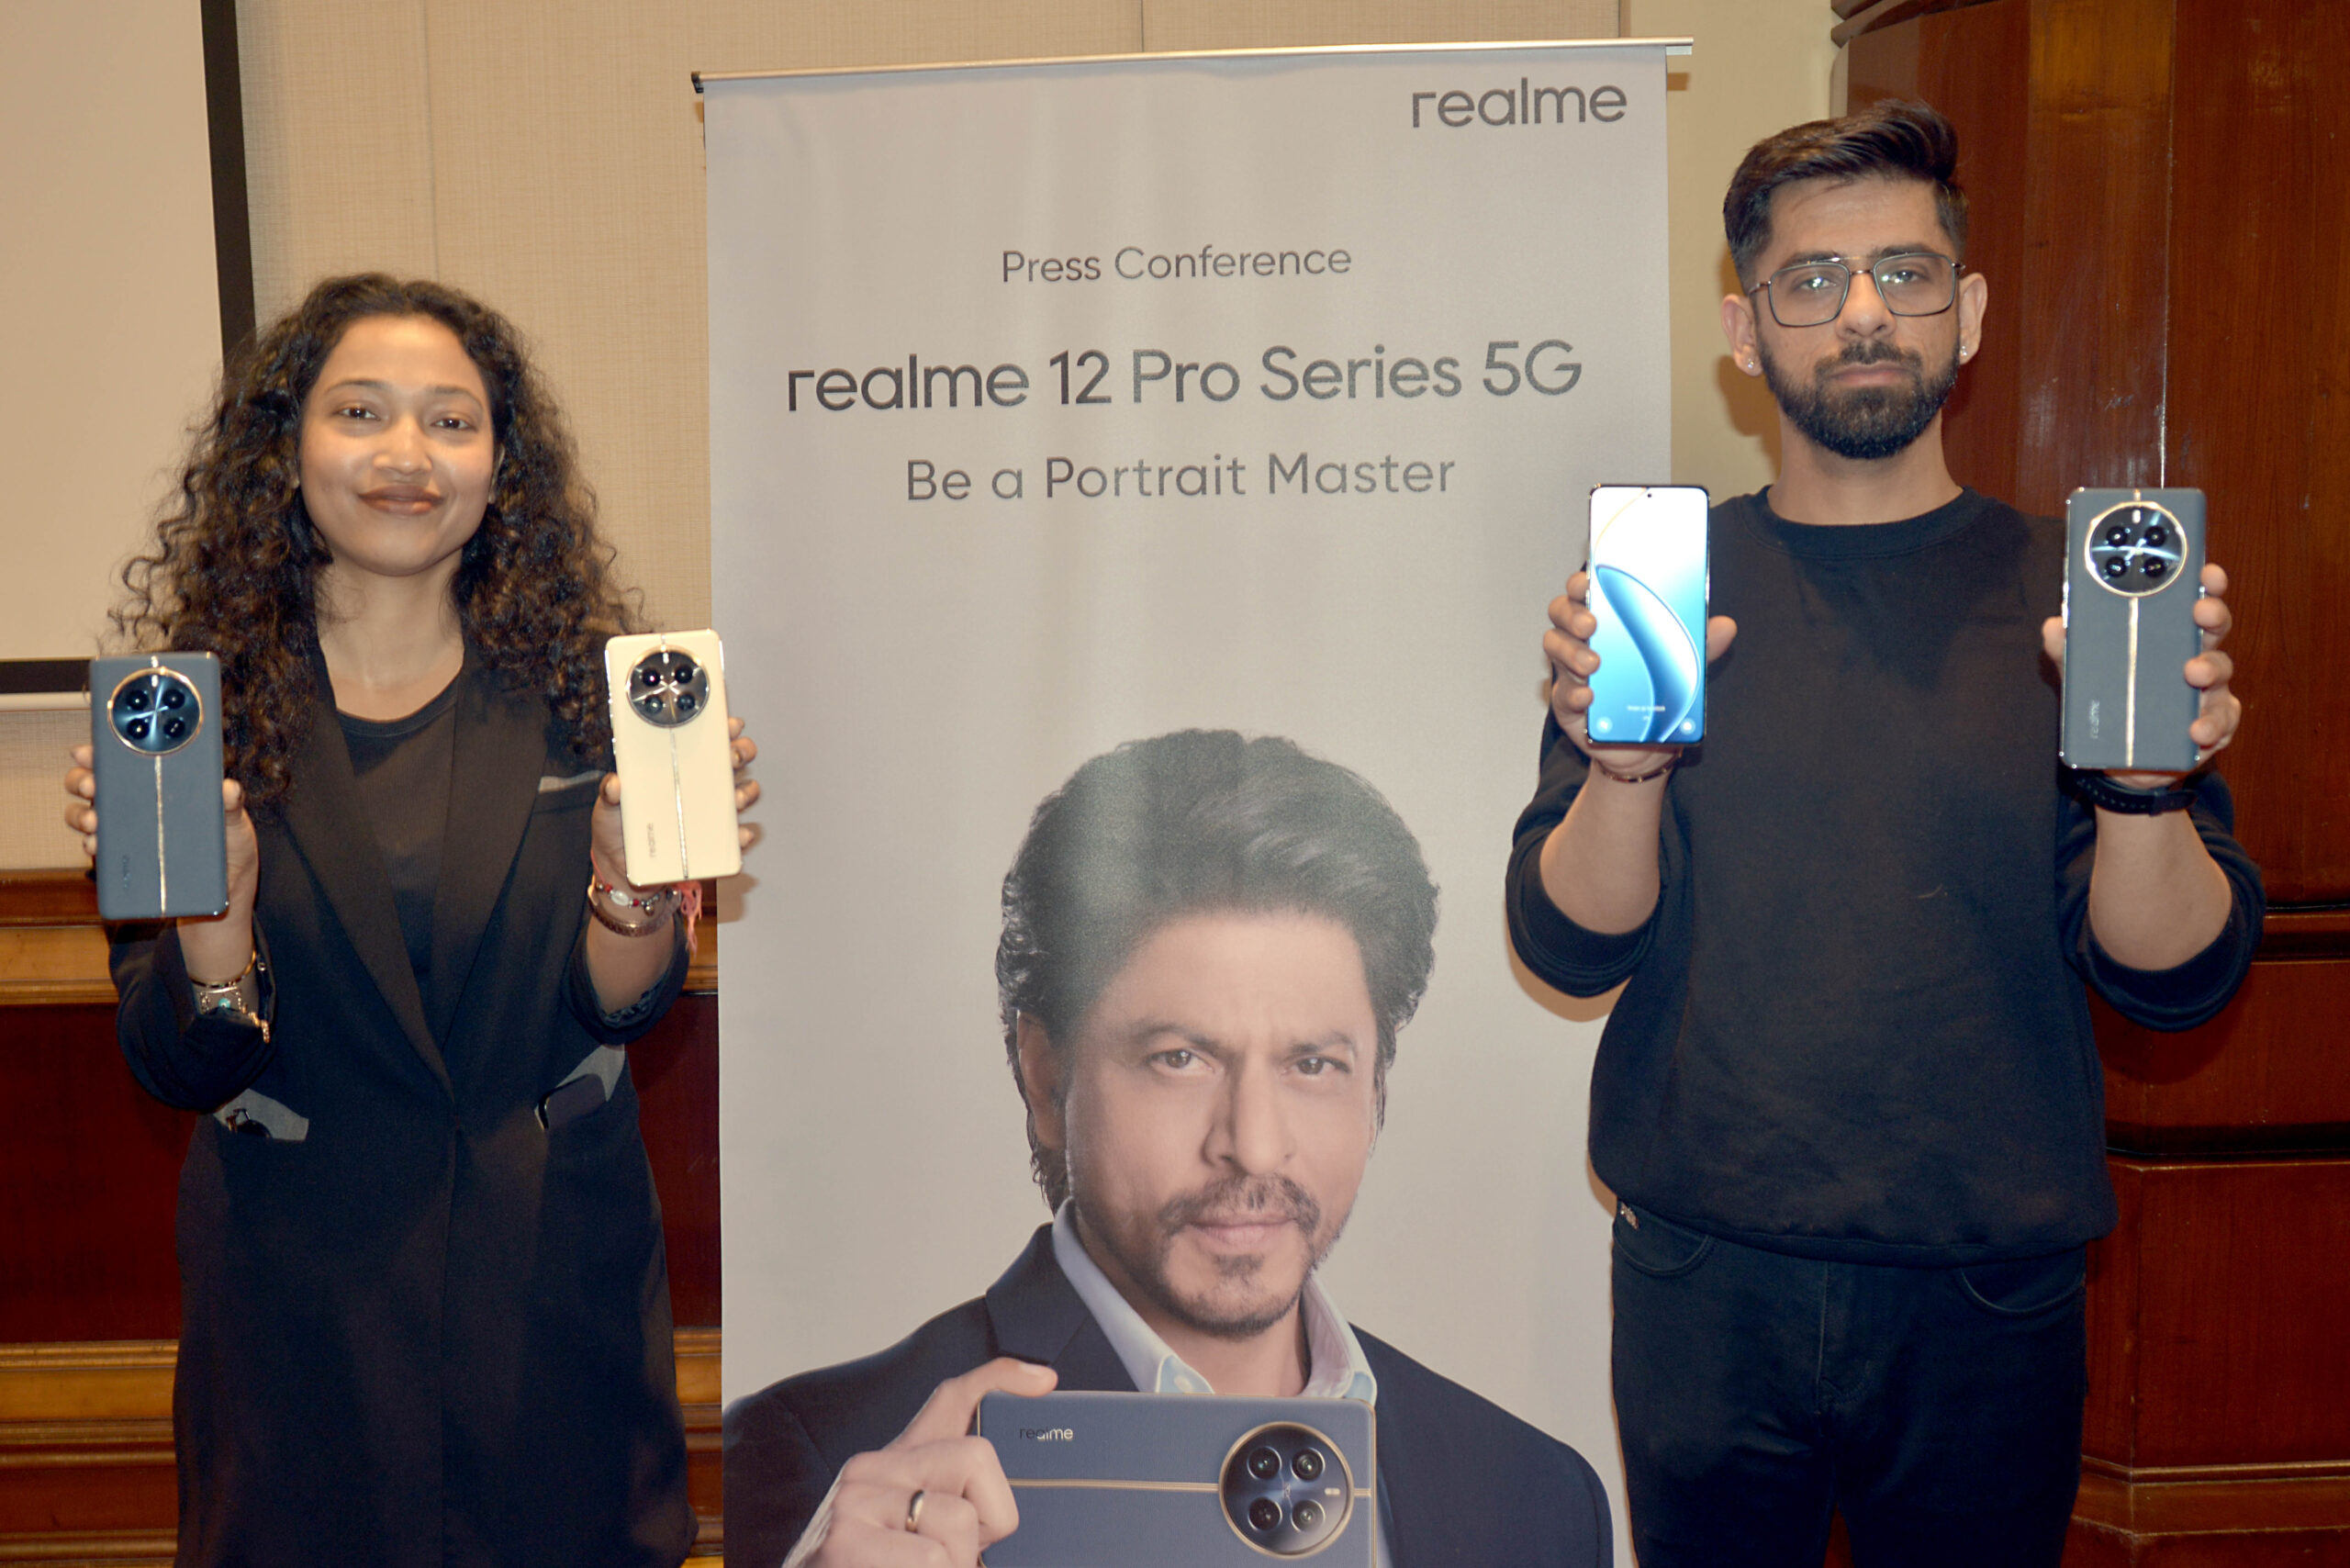 Media Preview Event Recap] realme 12 Pro Series 5G: Opening the Potential  of Periscope Technology - realme Community